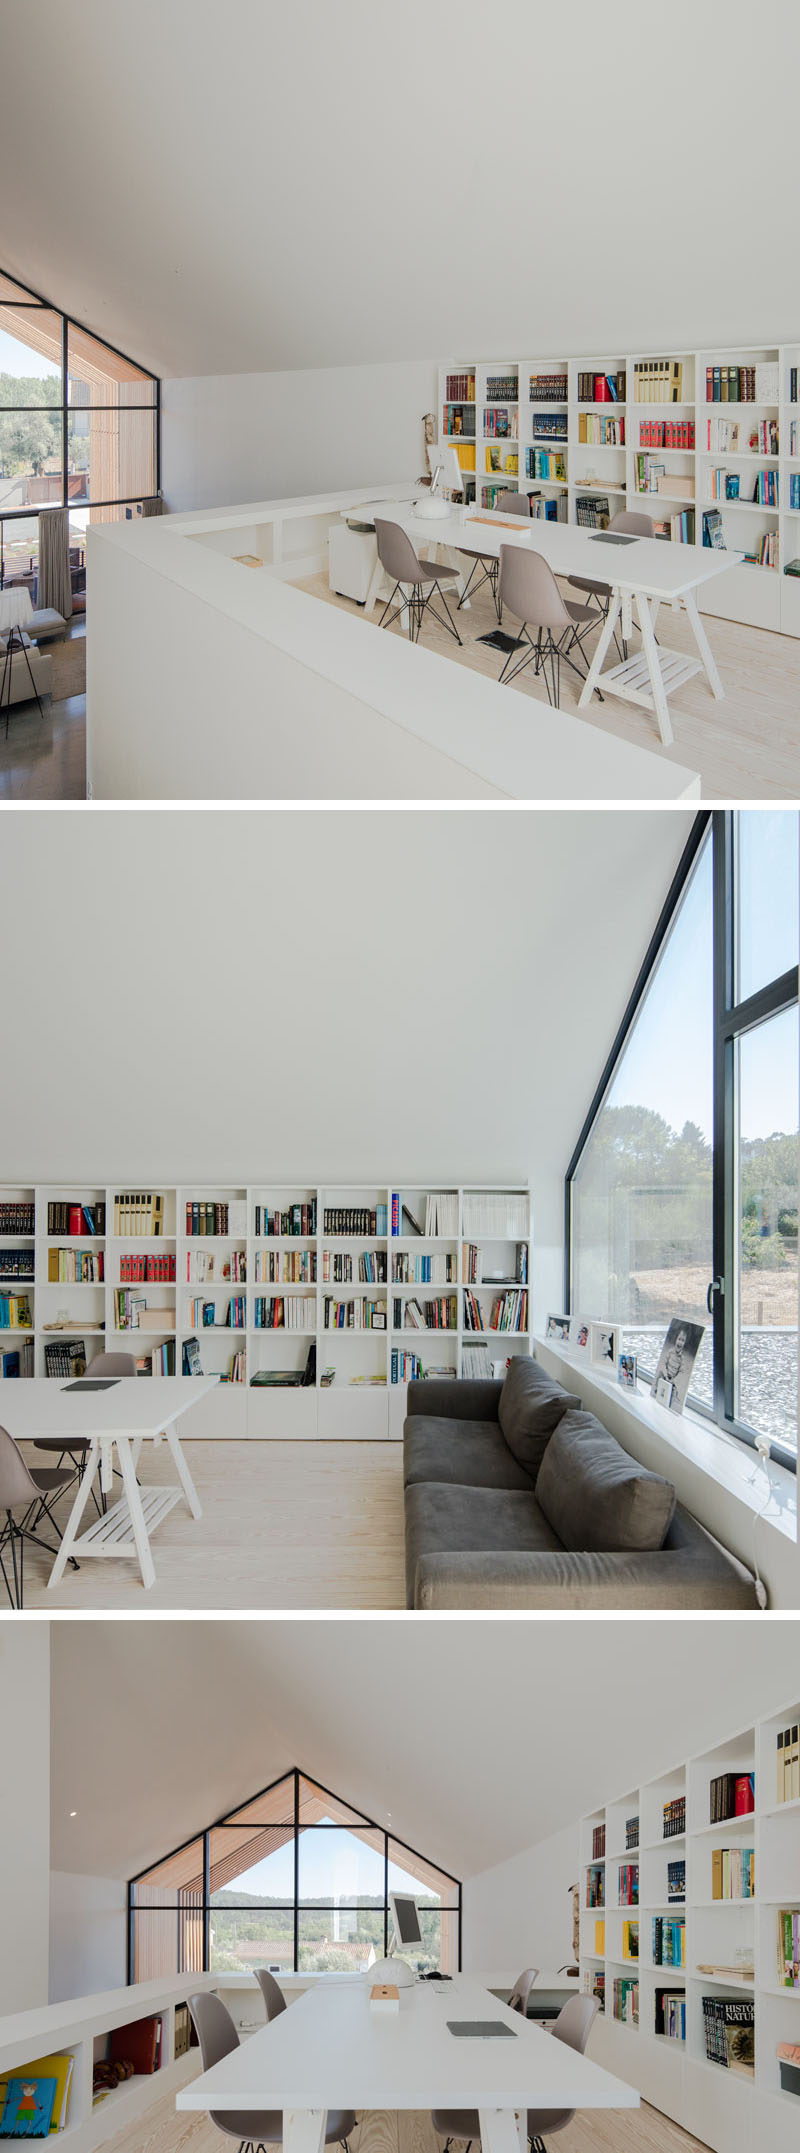 This loft area has been set up as a library / home office. A shelving unit runs along the wall and acts as a bookshelf and storage unit. A large white table provides space for four people to work at and underneath the window is a couch for relaxed reading. #ModernLibrary #HomeOffice #Shelving